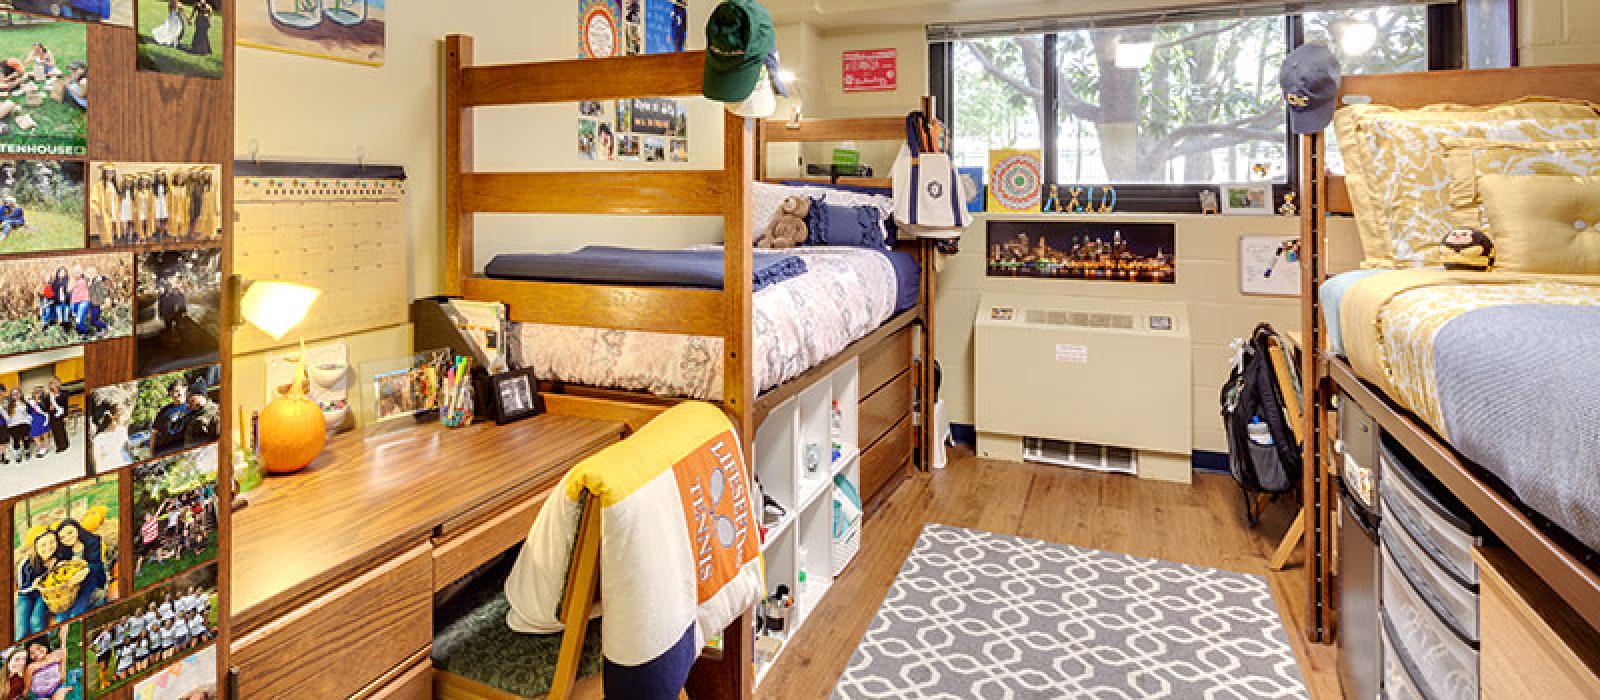 Bedroom with 2 beds high rised, a desk, and a chair. Photos and other student decorations.